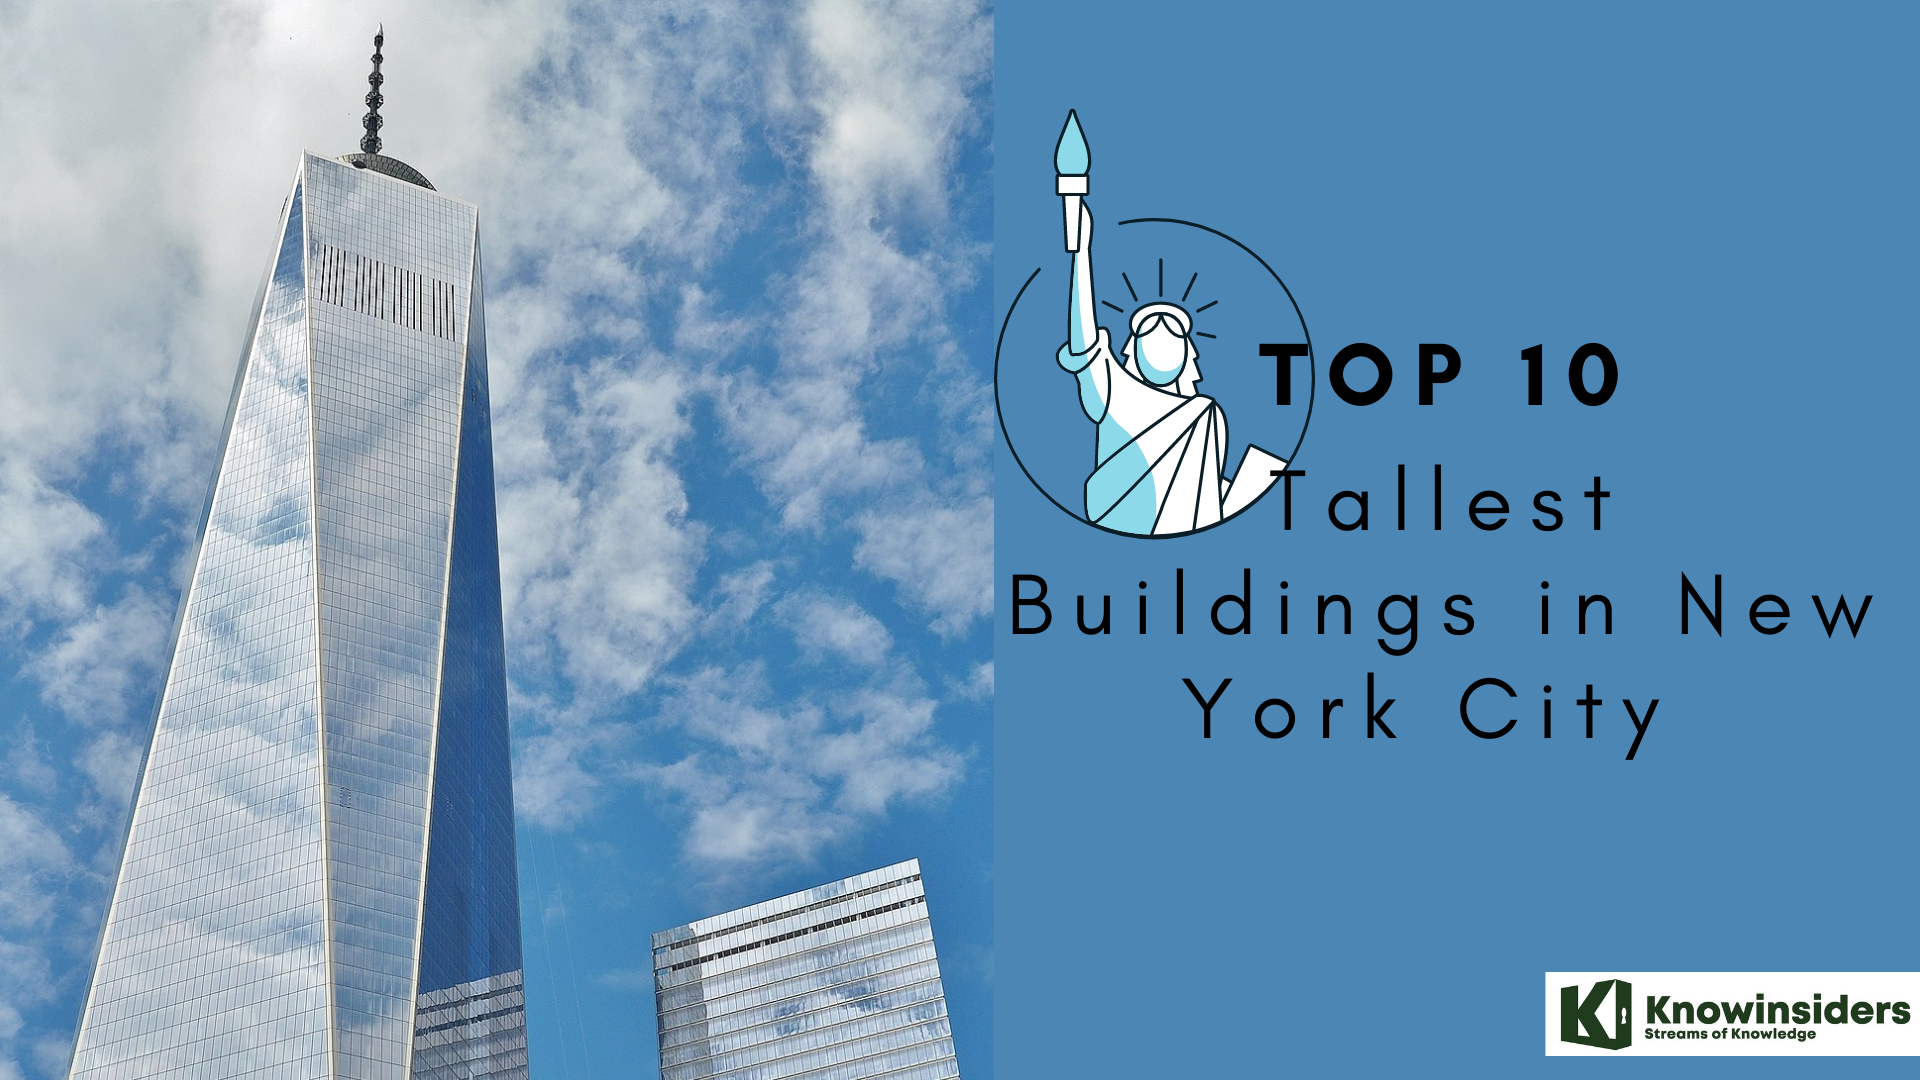 Top 10 Tallest Building In New York